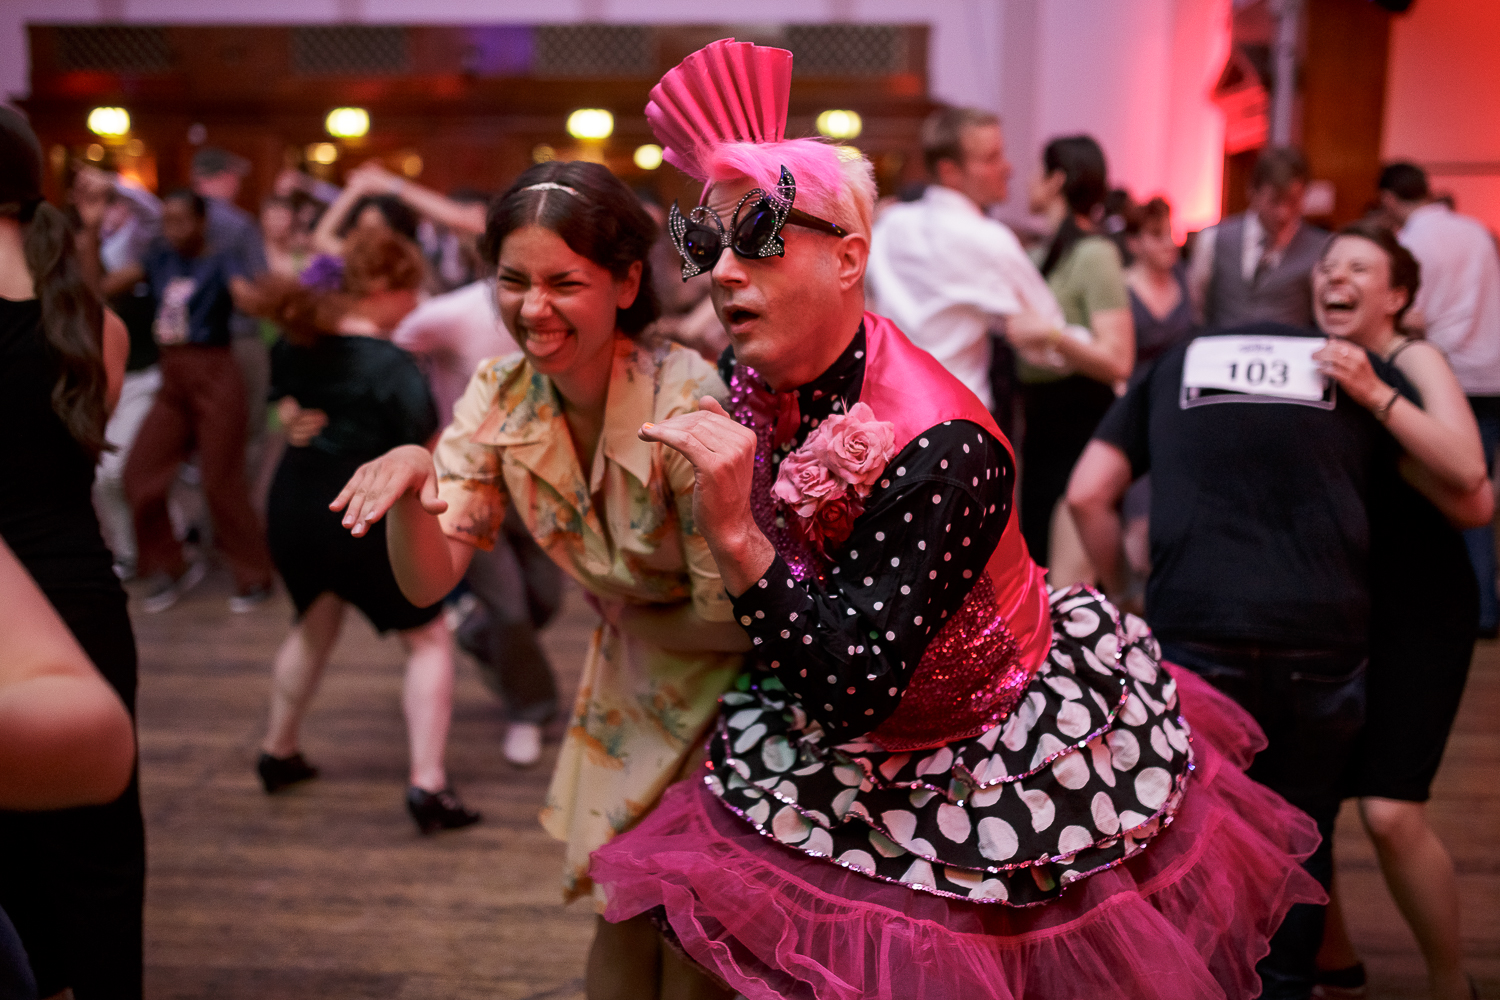  The London Swing Festival 2015 - Sunday Night. Photo Credit: For Dancers Only (http://d.pr/1fEEY) - http://www.ebobrie.com/london-swing-festival-2015/ 